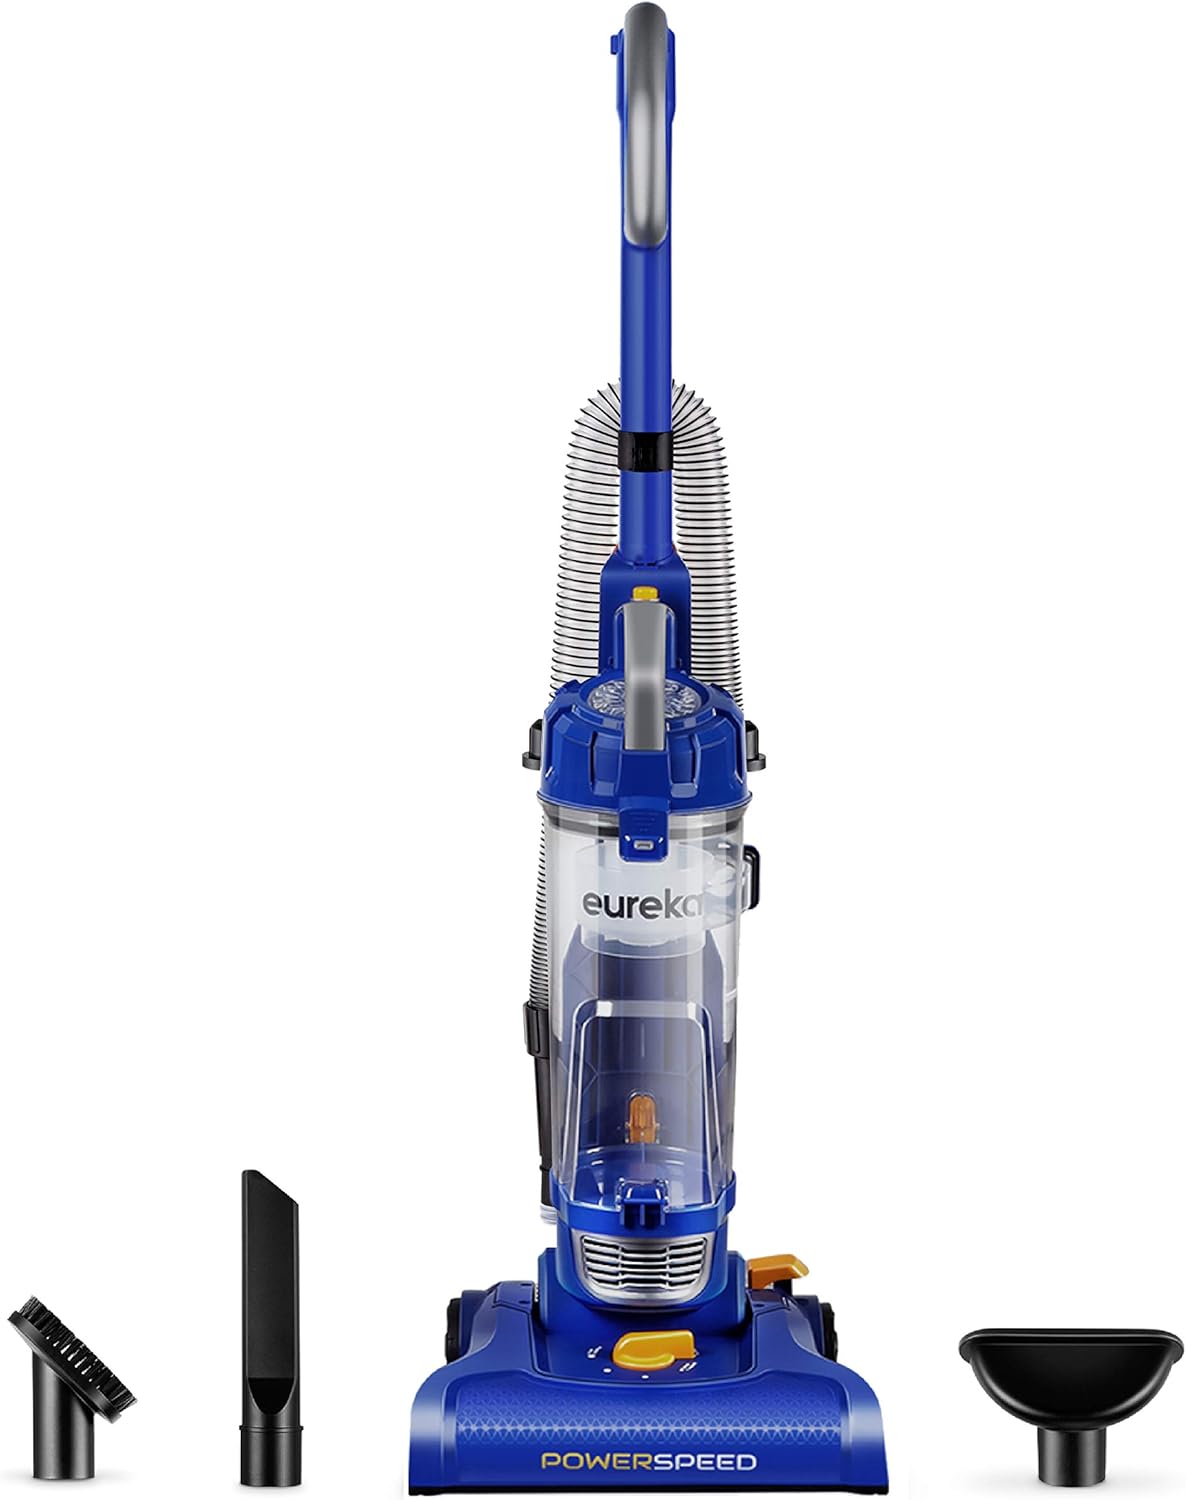 Eureka NEU182A Review: Powerful and Lightweight Vacuum Cleaner for Efficient Cleaning